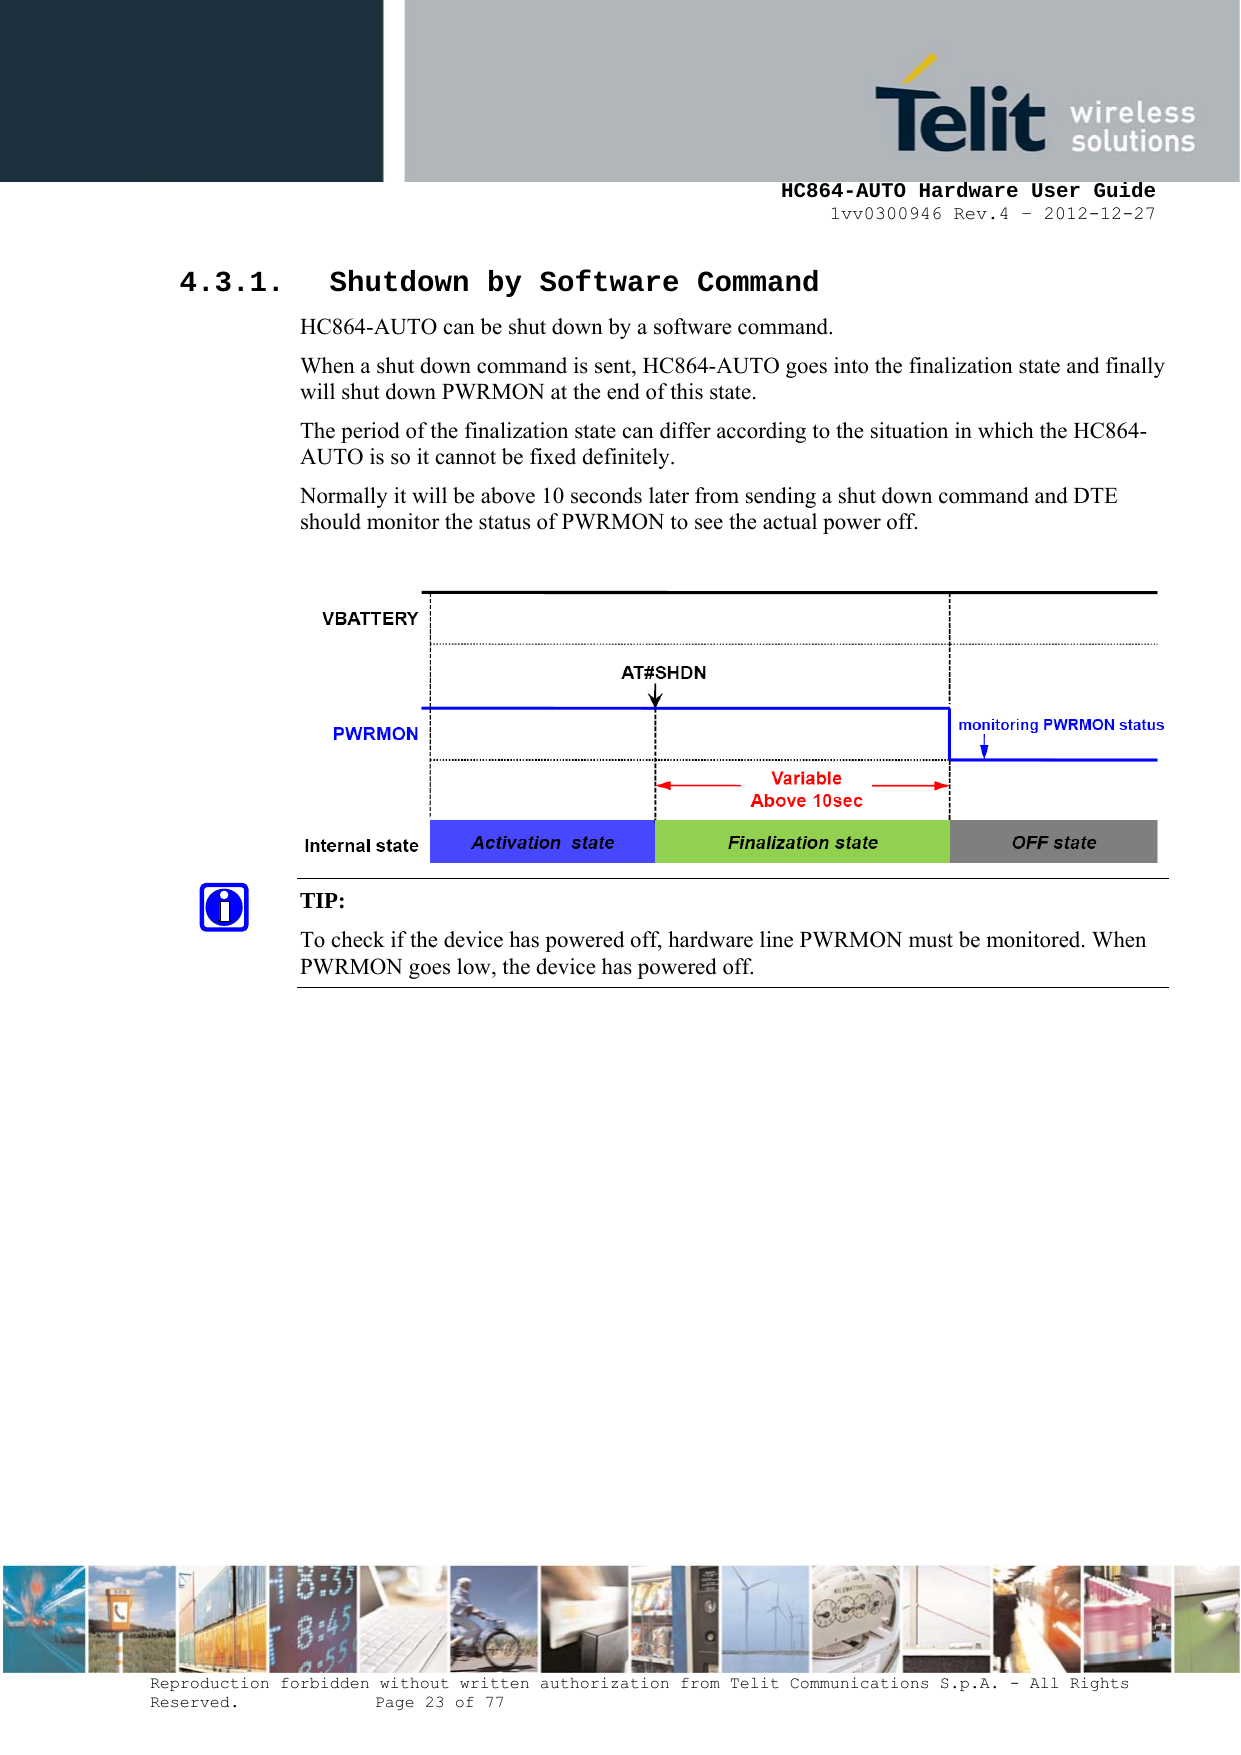     HC864-AUTO Hardware User Guide 1vv0300946 Rev.4 – 2012-12-27 Reproduction forbidden without written authorization from Telit Communications S.p.A. - All Rights Reserved.    Page 23 of 77  4.3.1. Shutdown by Software Command HC864-AUTO can be shut down by a software command. When a shut down command is sent, HC864-AUTO goes into the finalization state and finally will shut down PWRMON at the end of this state. The period of the finalization state can differ according to the situation in which the HC864-AUTO is so it cannot be fixed definitely. Normally it will be above 10 seconds later from sending a shut down command and DTE should monitor the status of PWRMON to see the actual power off.   TIP:  To check if the device has powered off, hardware line PWRMON must be monitored. When PWRMON goes low, the device has powered off.  